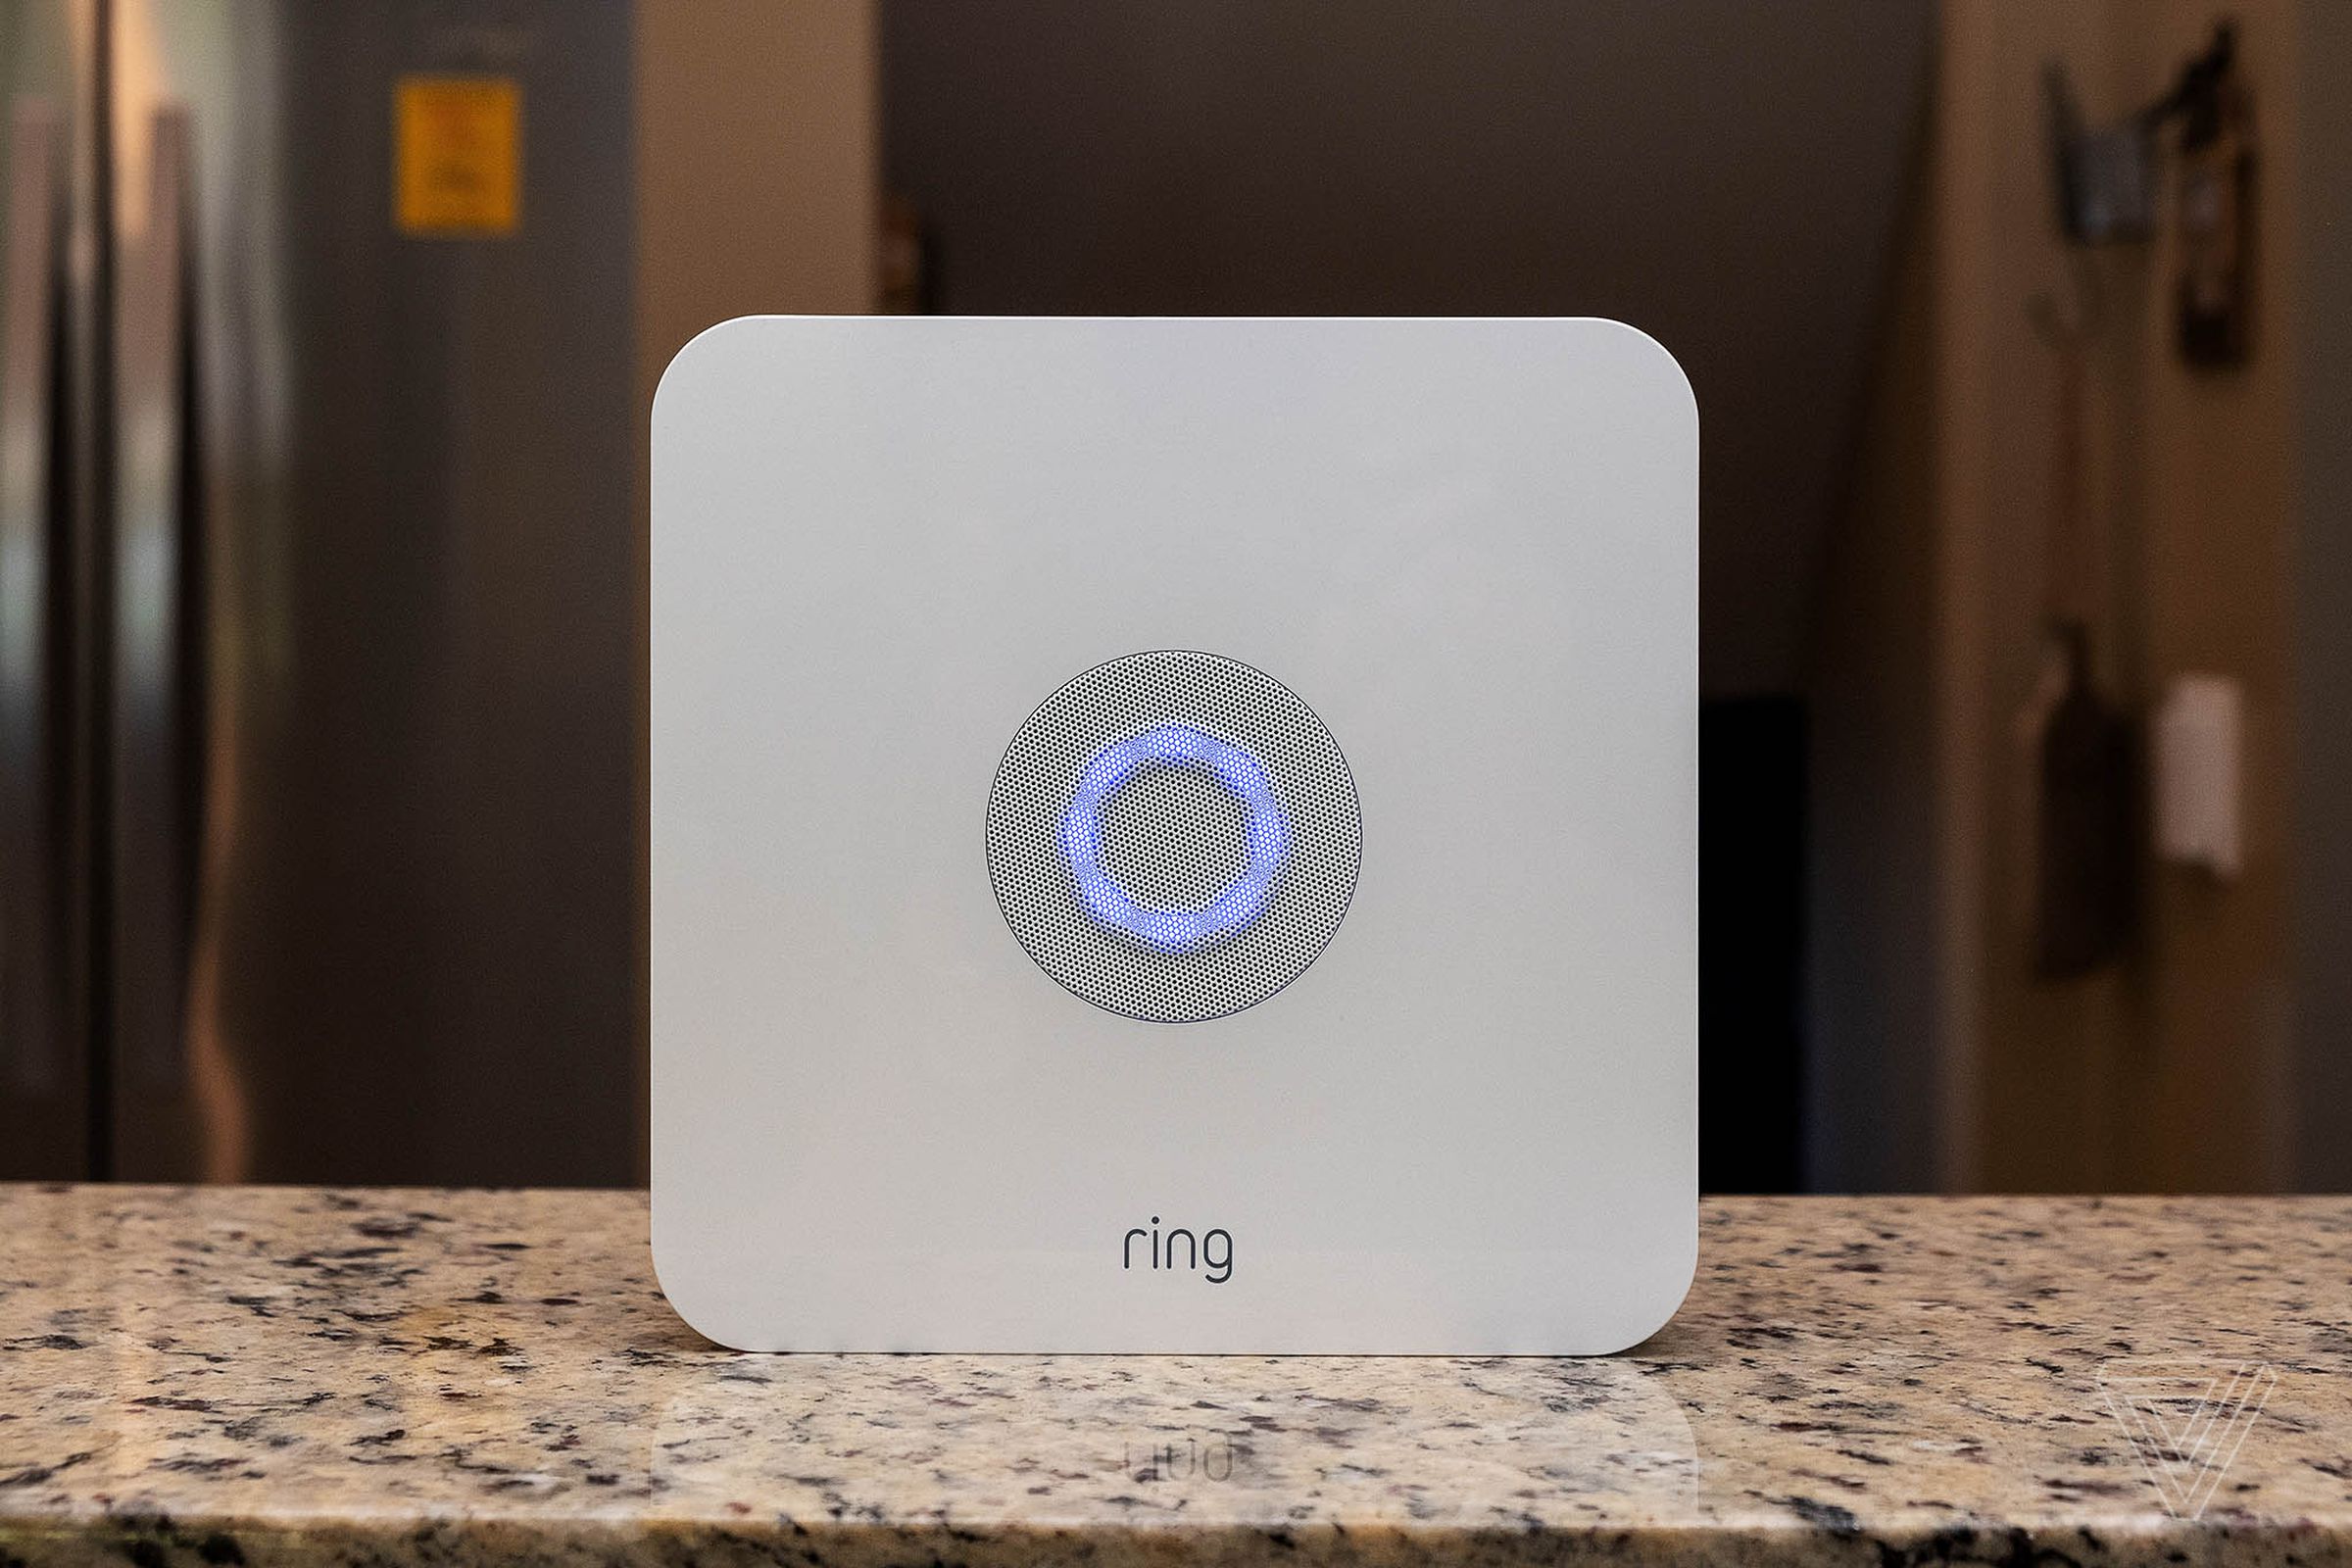 Smart doorbell and security startup Ring is just one of many companies Amazon has acquired to get a foot into an emerging smart home category.